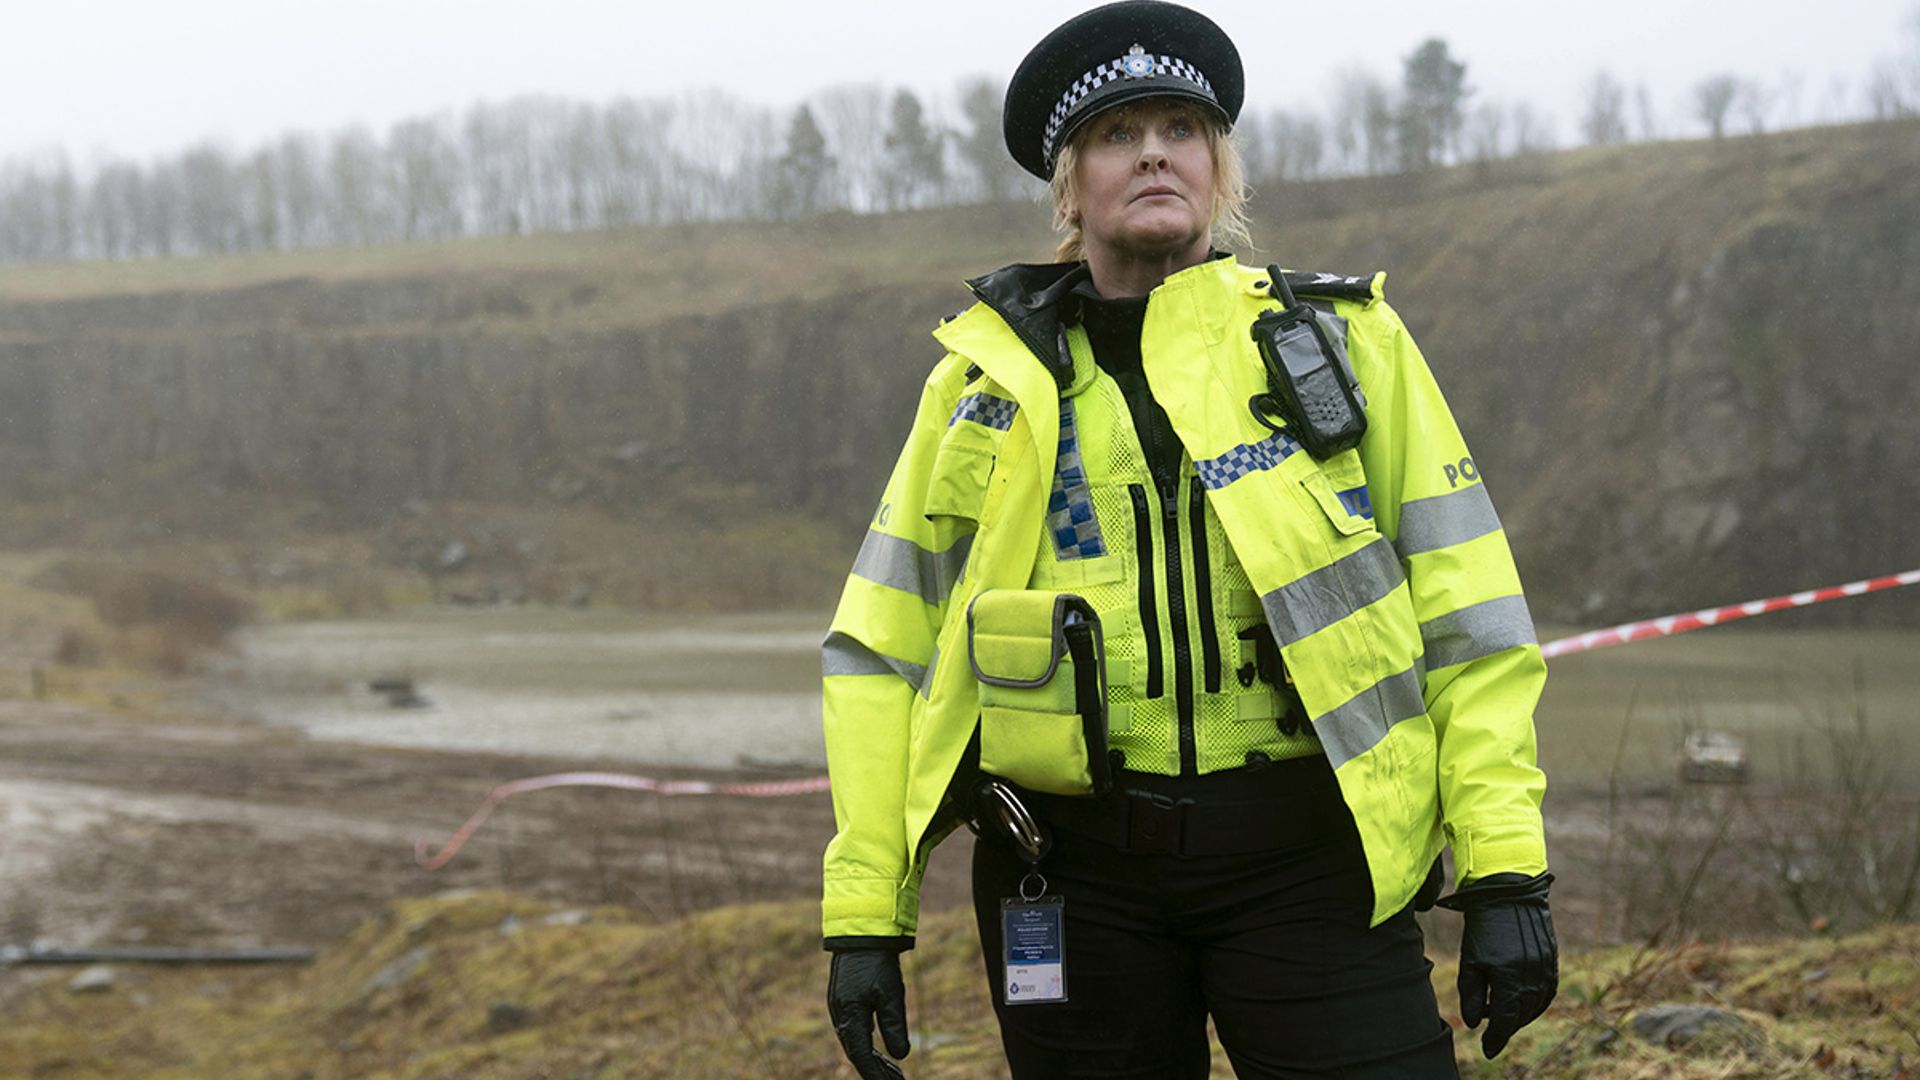 happy valley series 3 theories